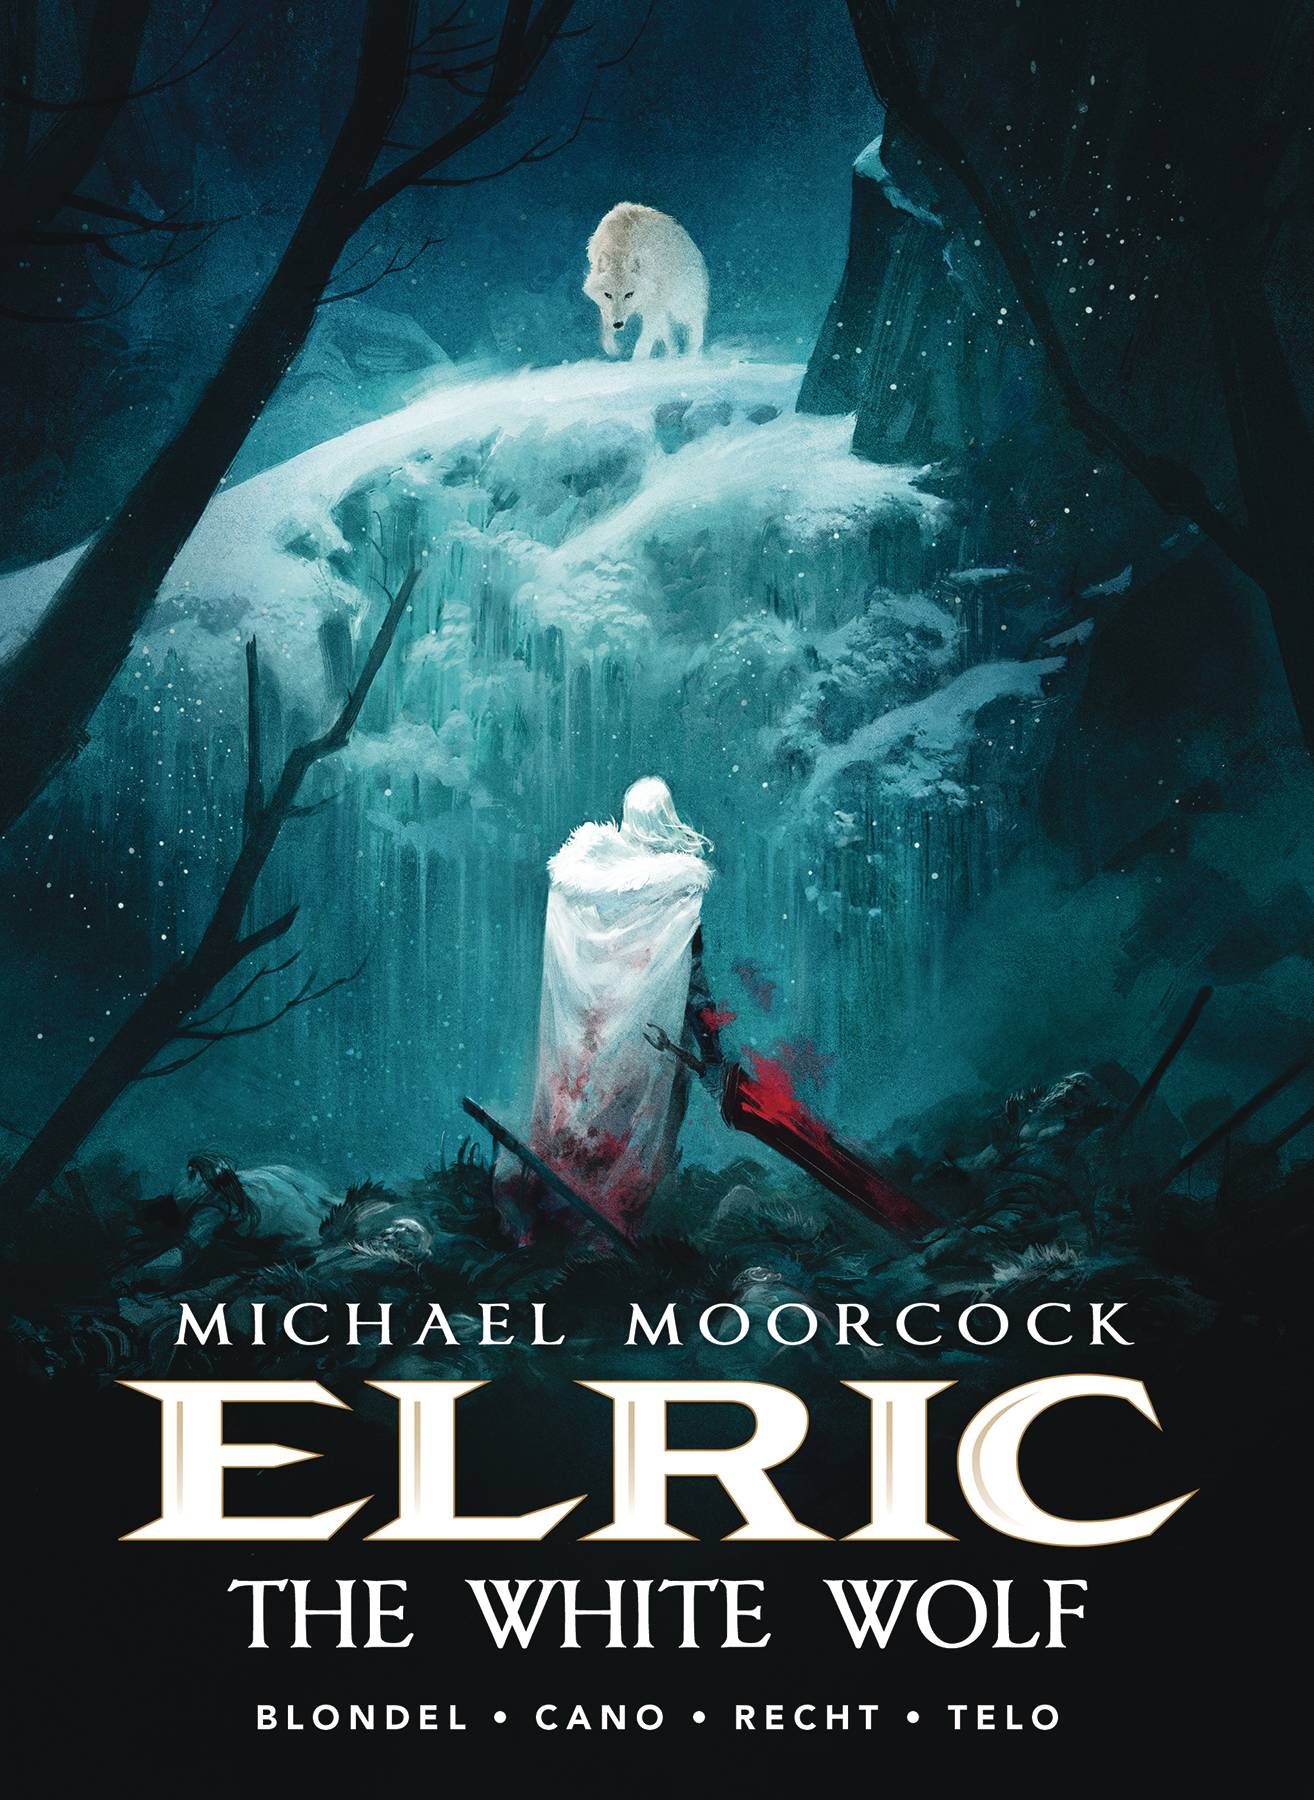 Moorcock Elric Hardcover Graphic Novel Volume 3 White Wolf